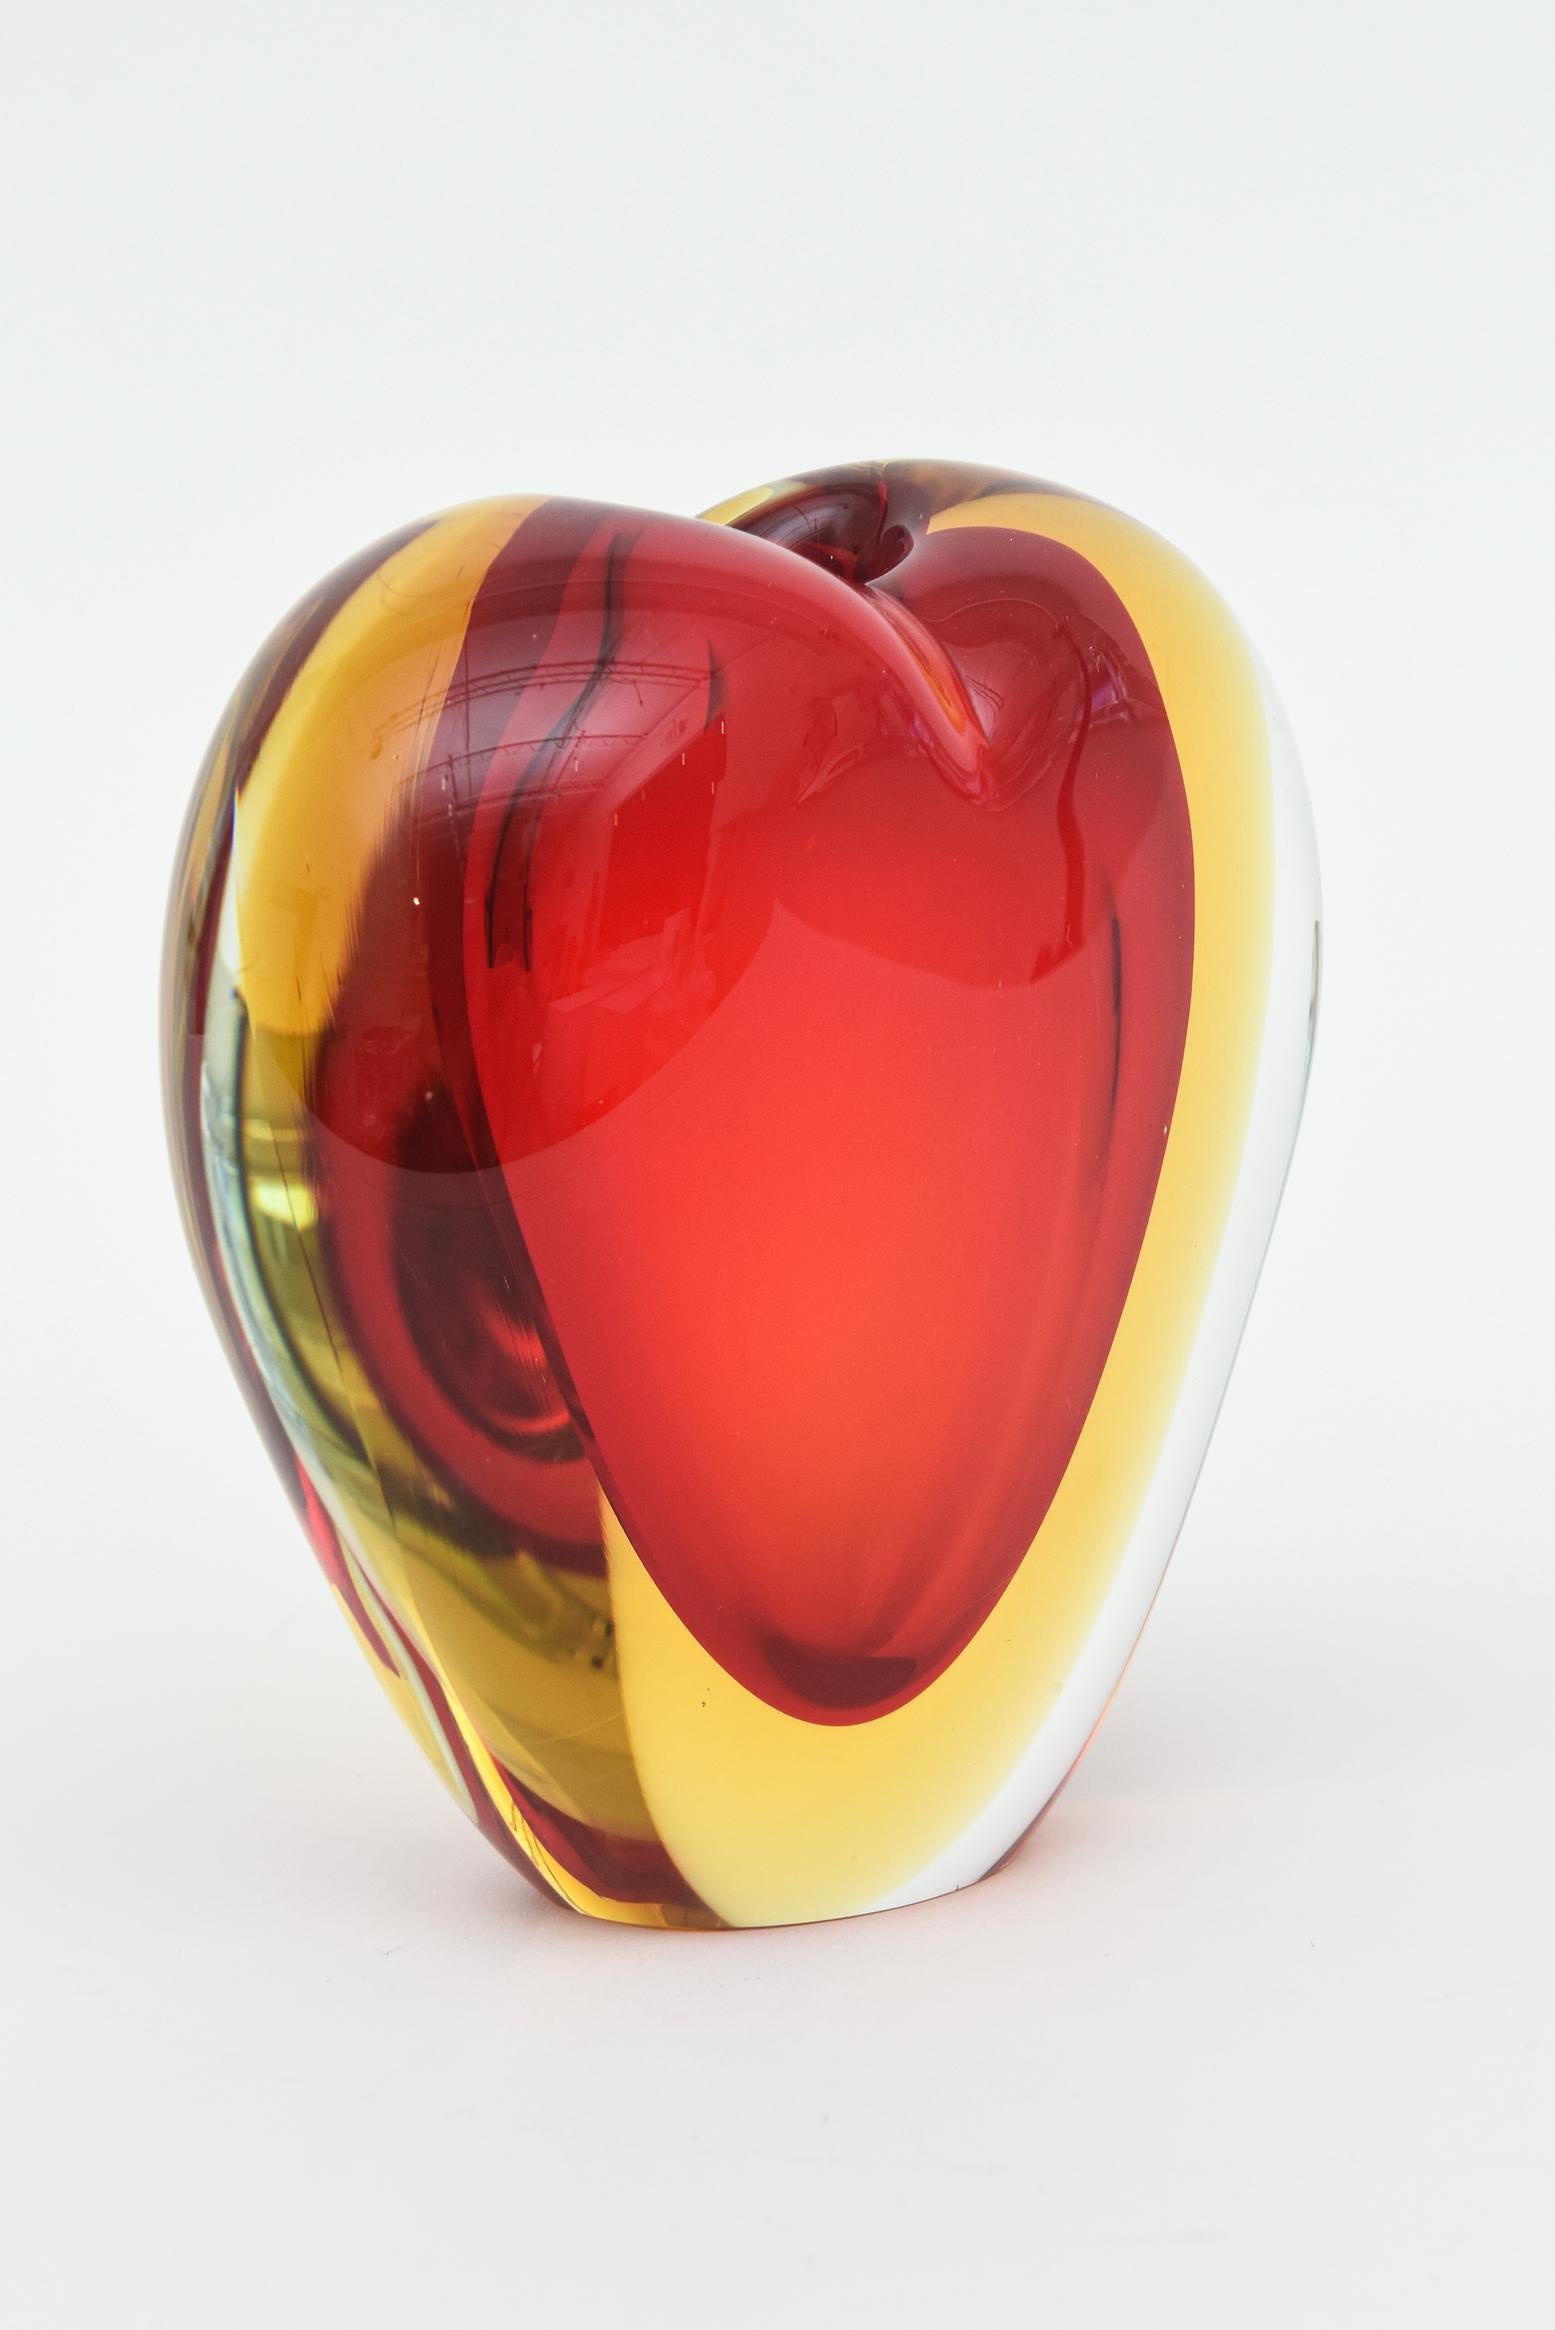 Italian Vintage Murano Antonio da Ros for Cenedese Red, Yellow Sommerso Heart Vase For Sale